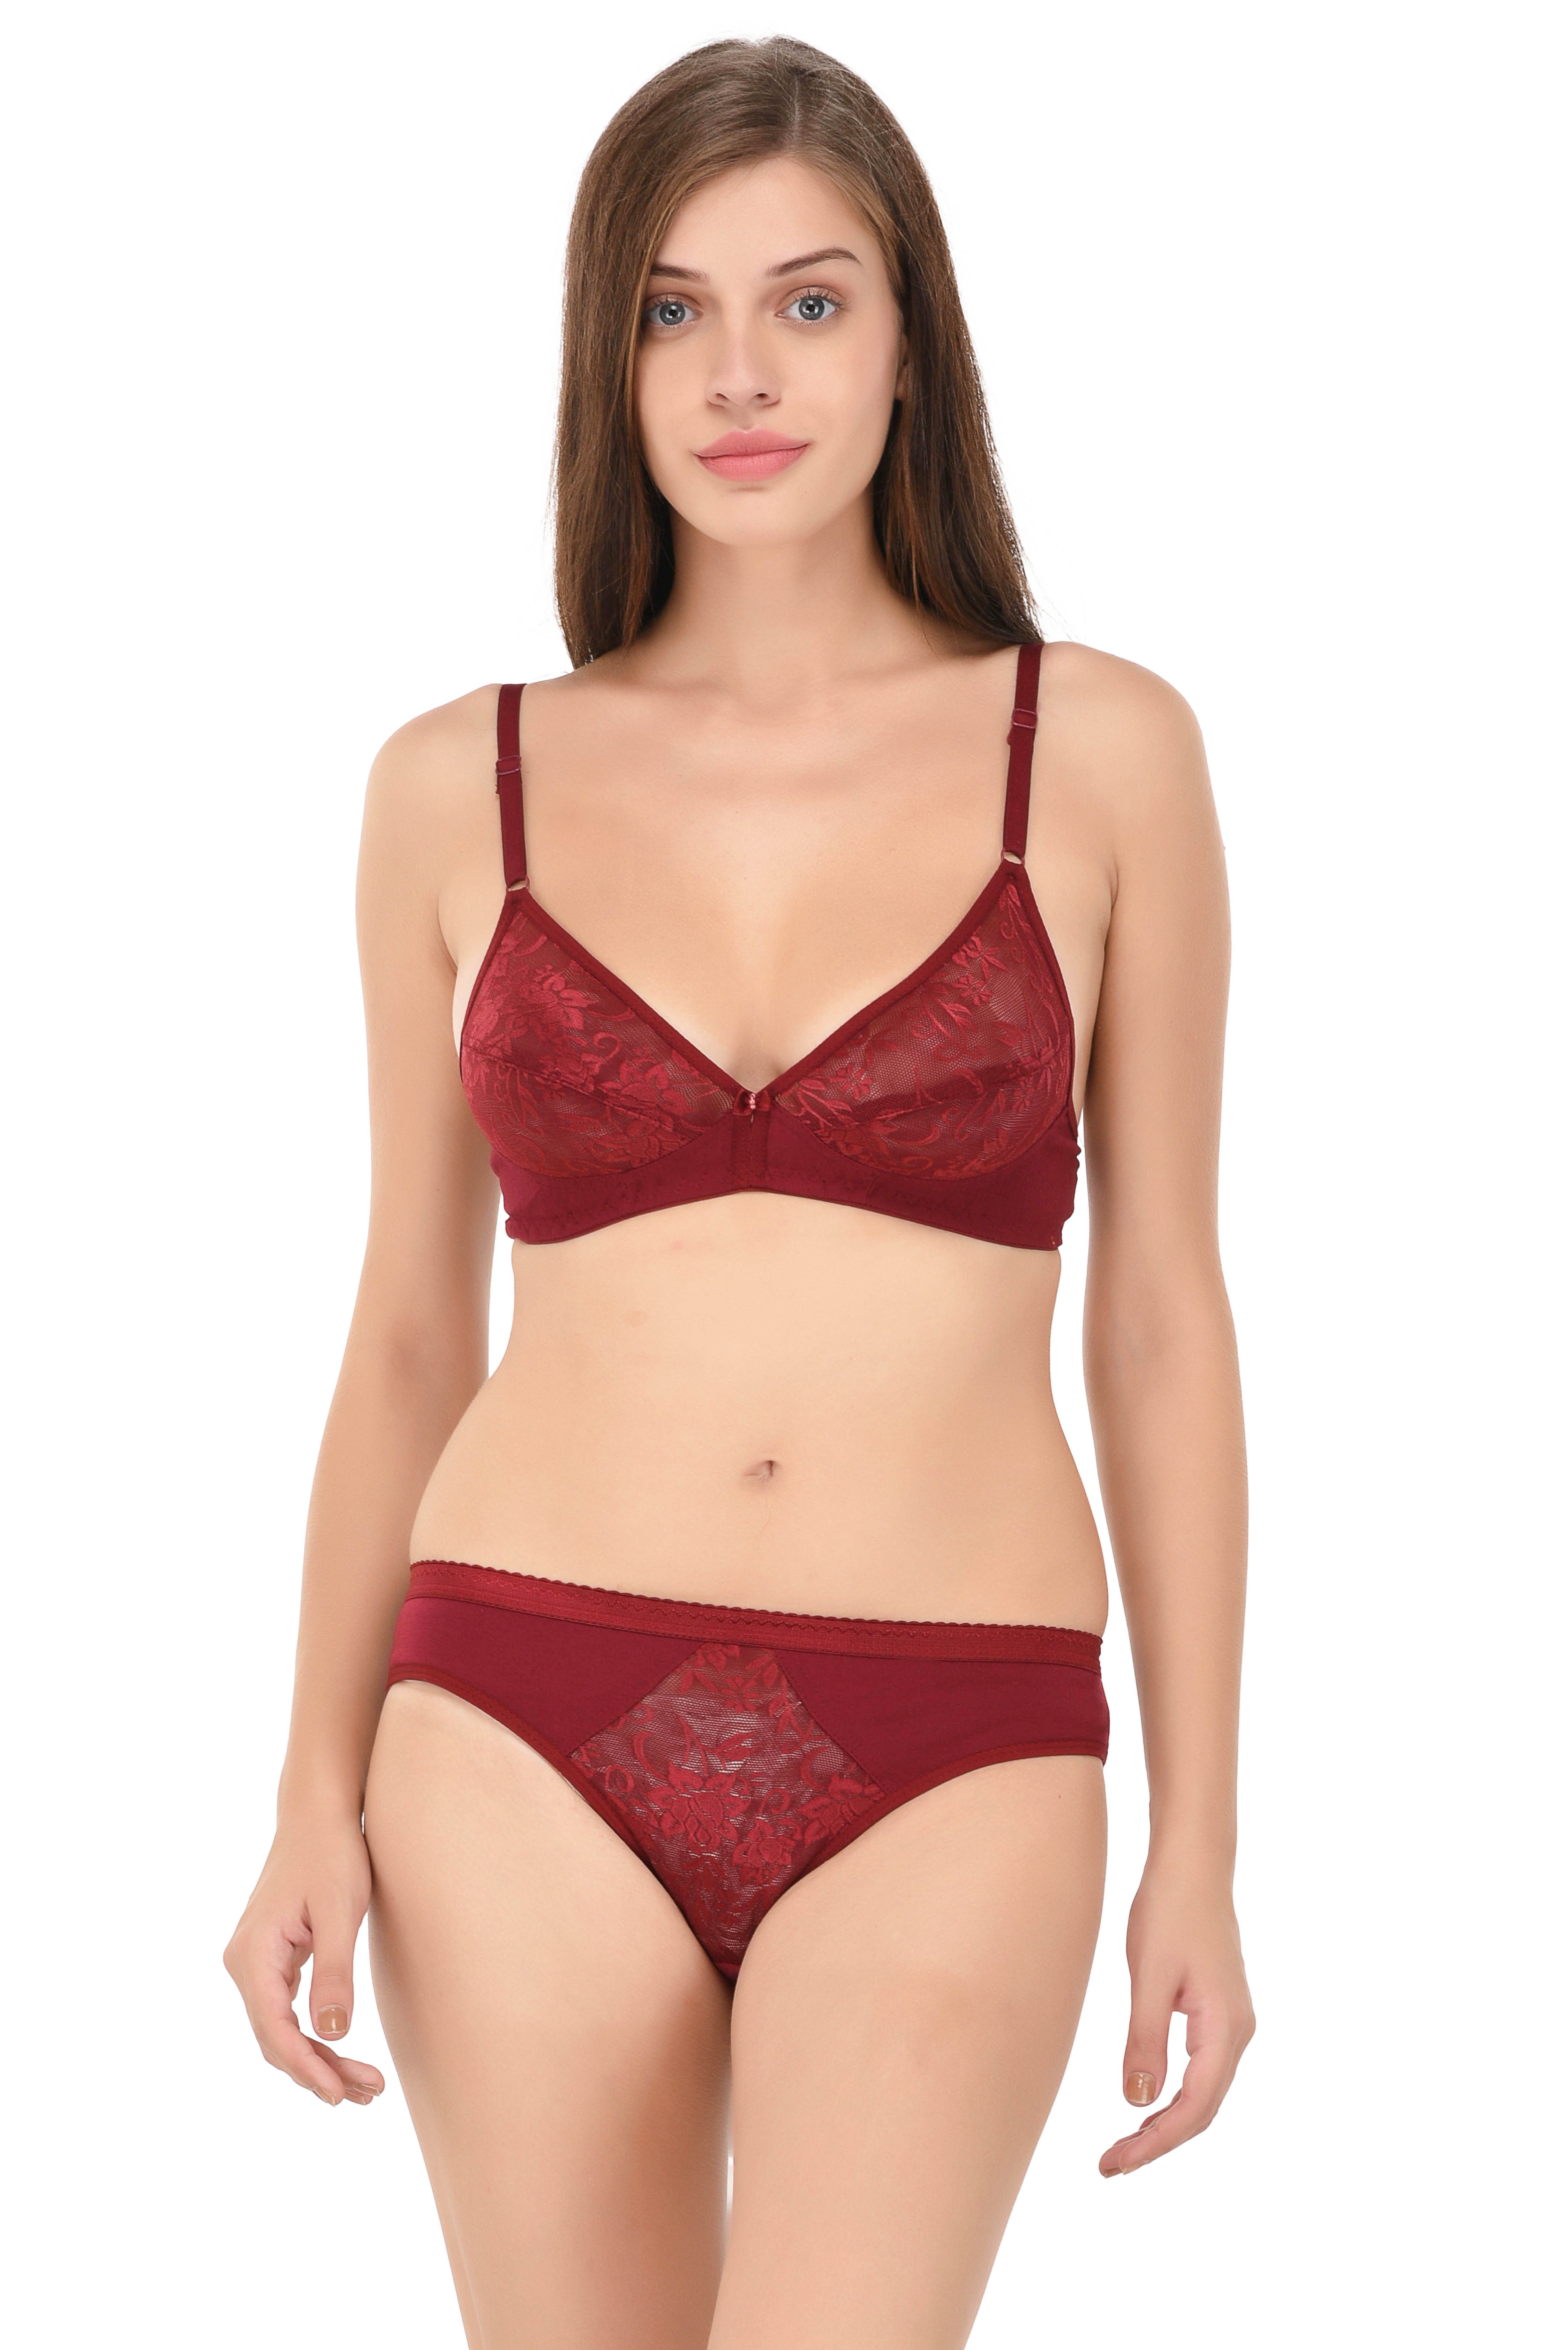 Buy LIZARAY Cotton Bra And Panty Set Online At Best Prices In India Snapdeal